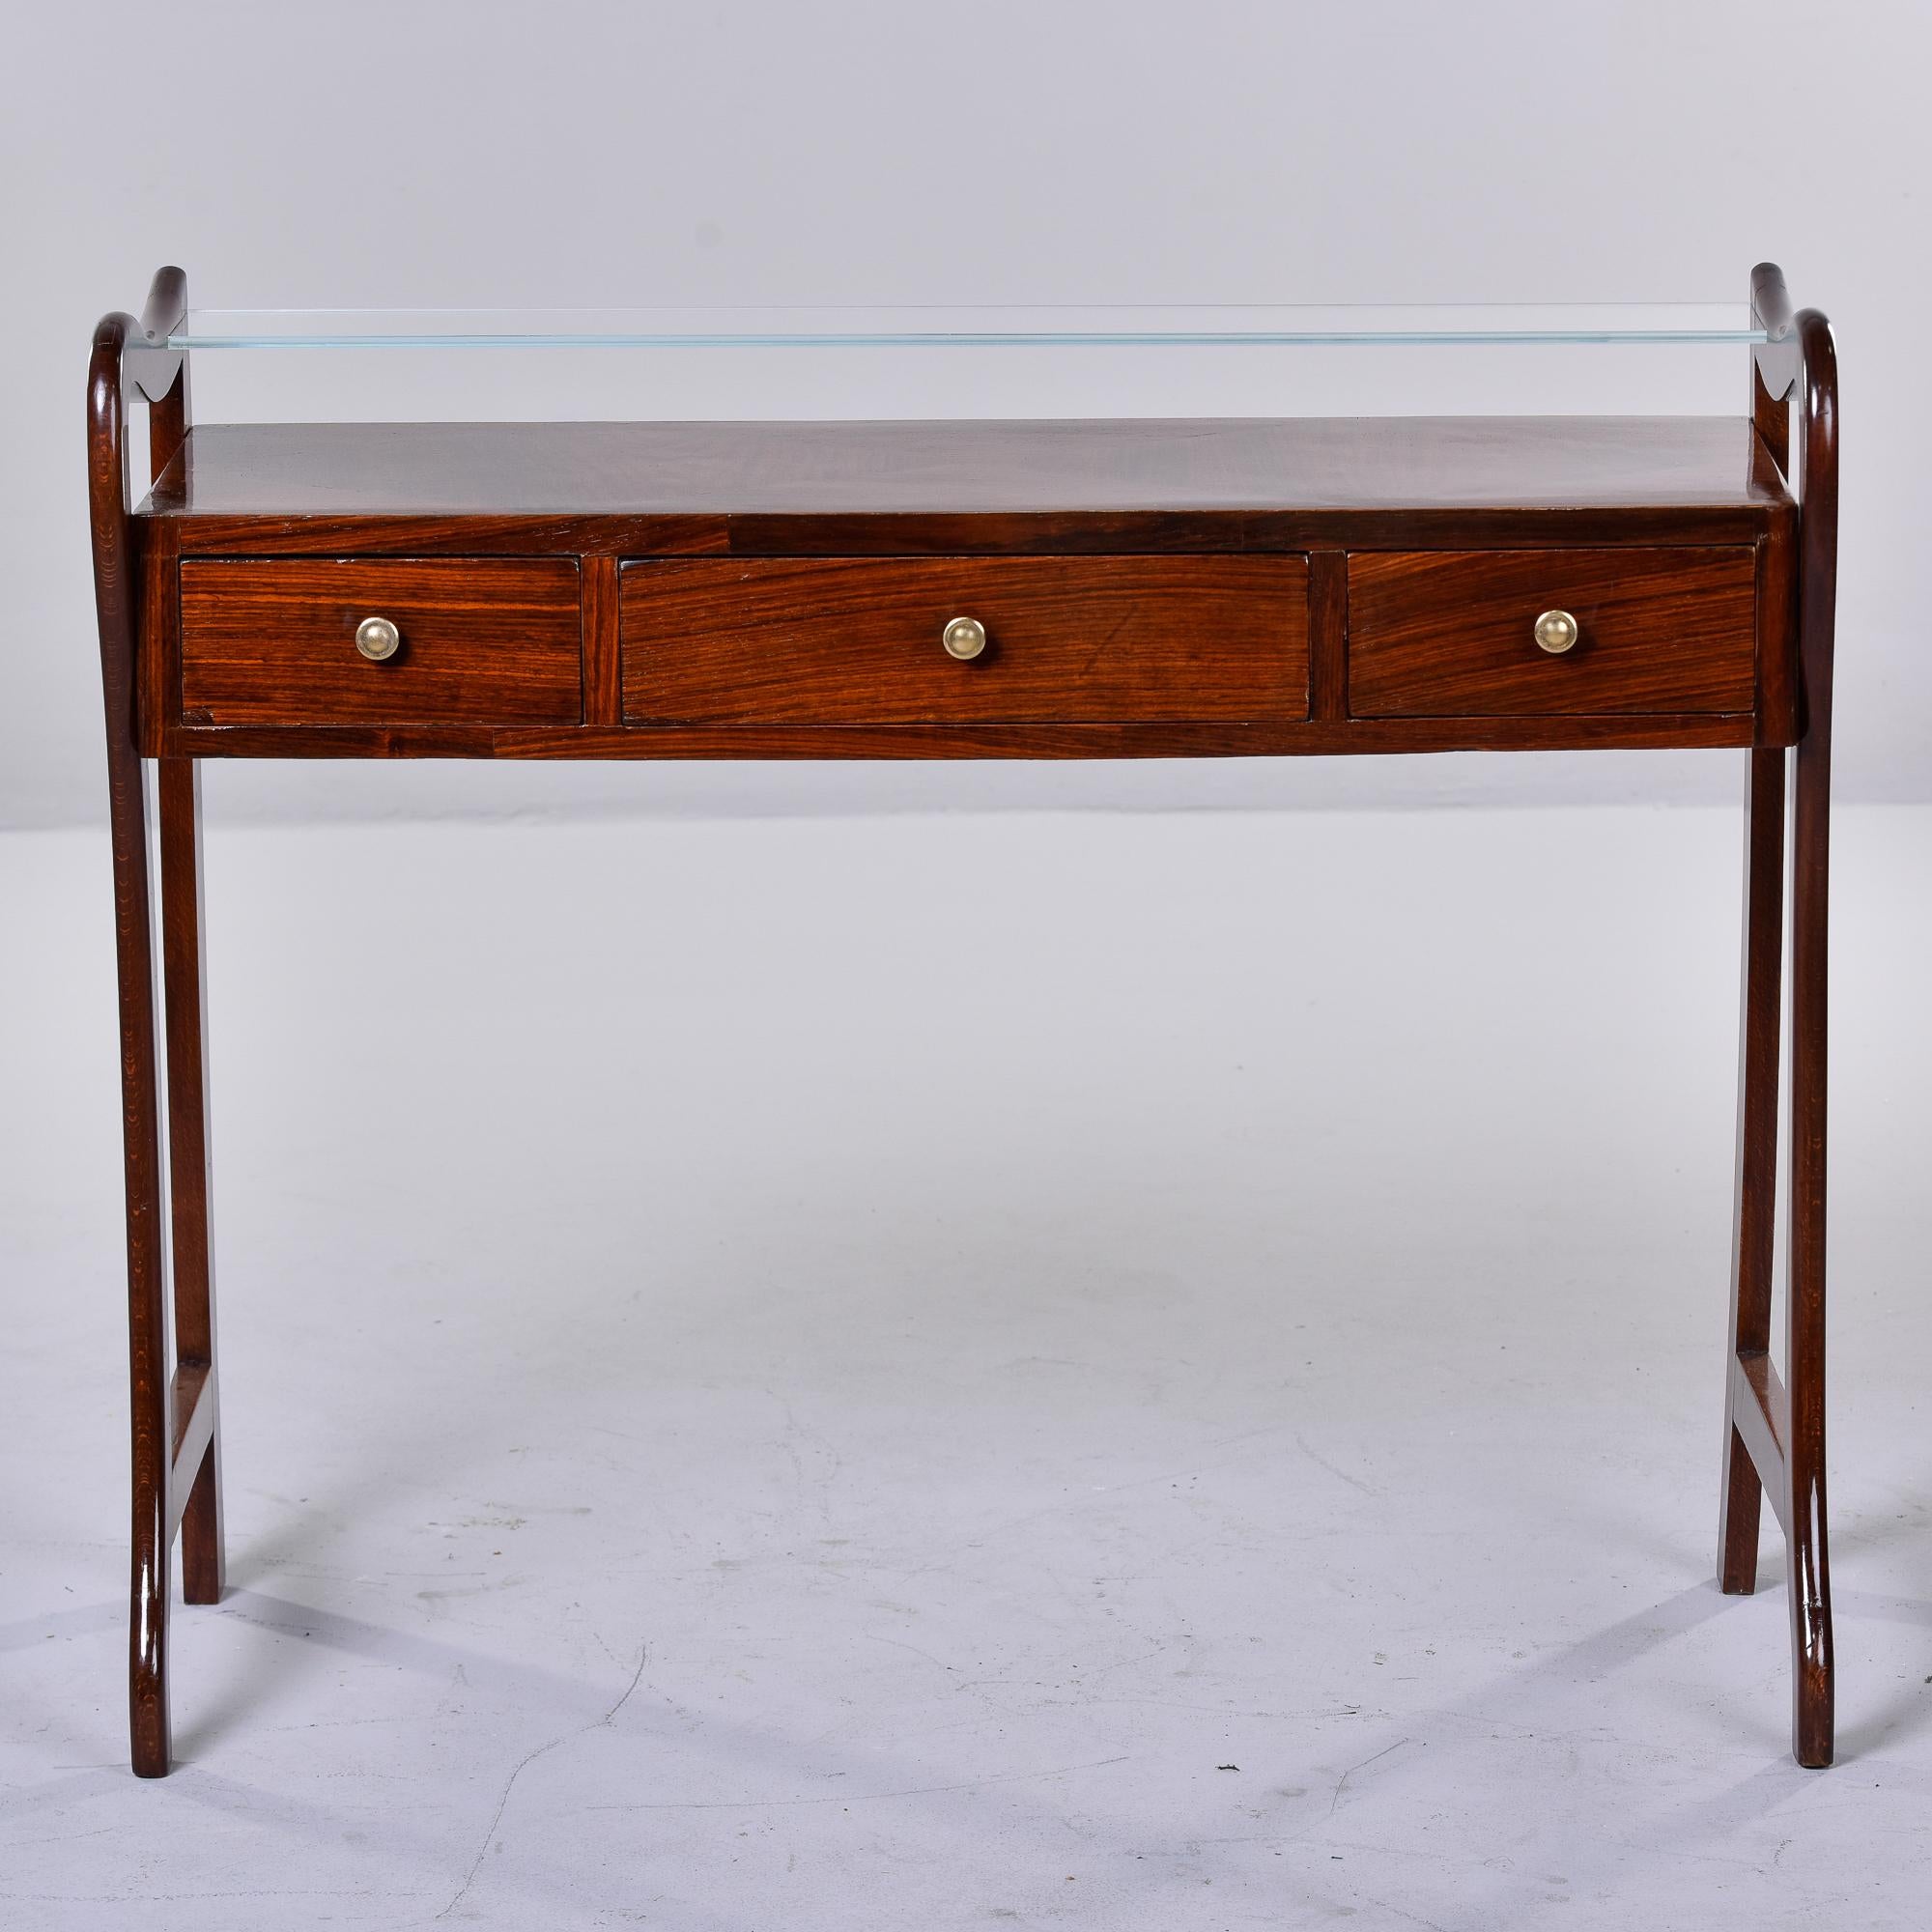 Found in Italy, this circa 1960s mahogany console is just under 40” wide. Console’s top level has a glass shelf that is half the depth of the console with three functional drawers below. Unknown maker. Versatile size. Very good vintage condition.